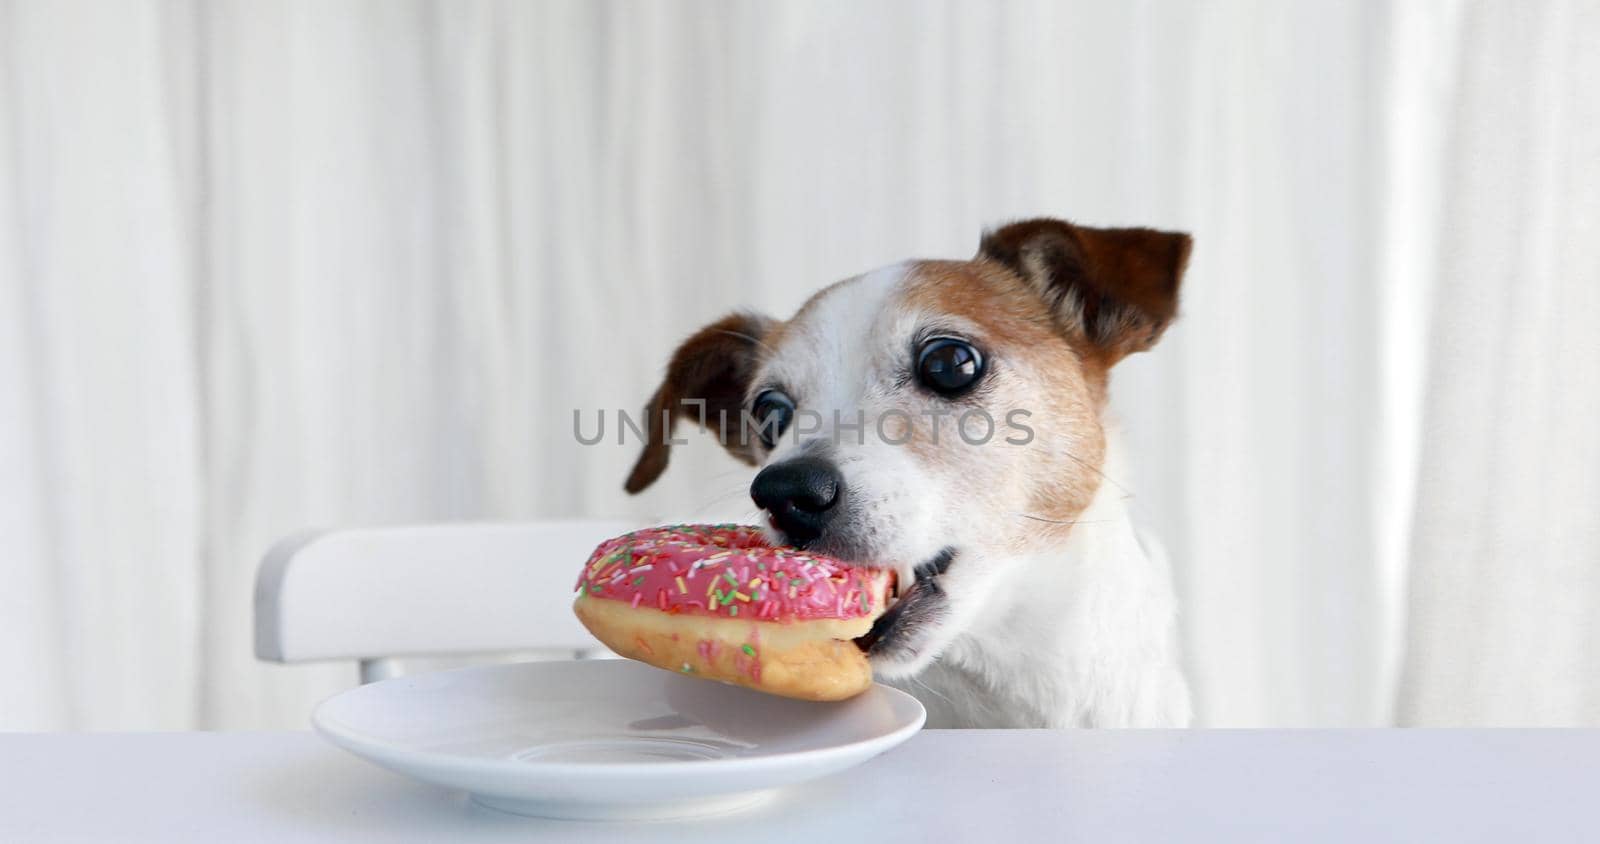 Cute dog stealing doughnut from plate on table by Demkat